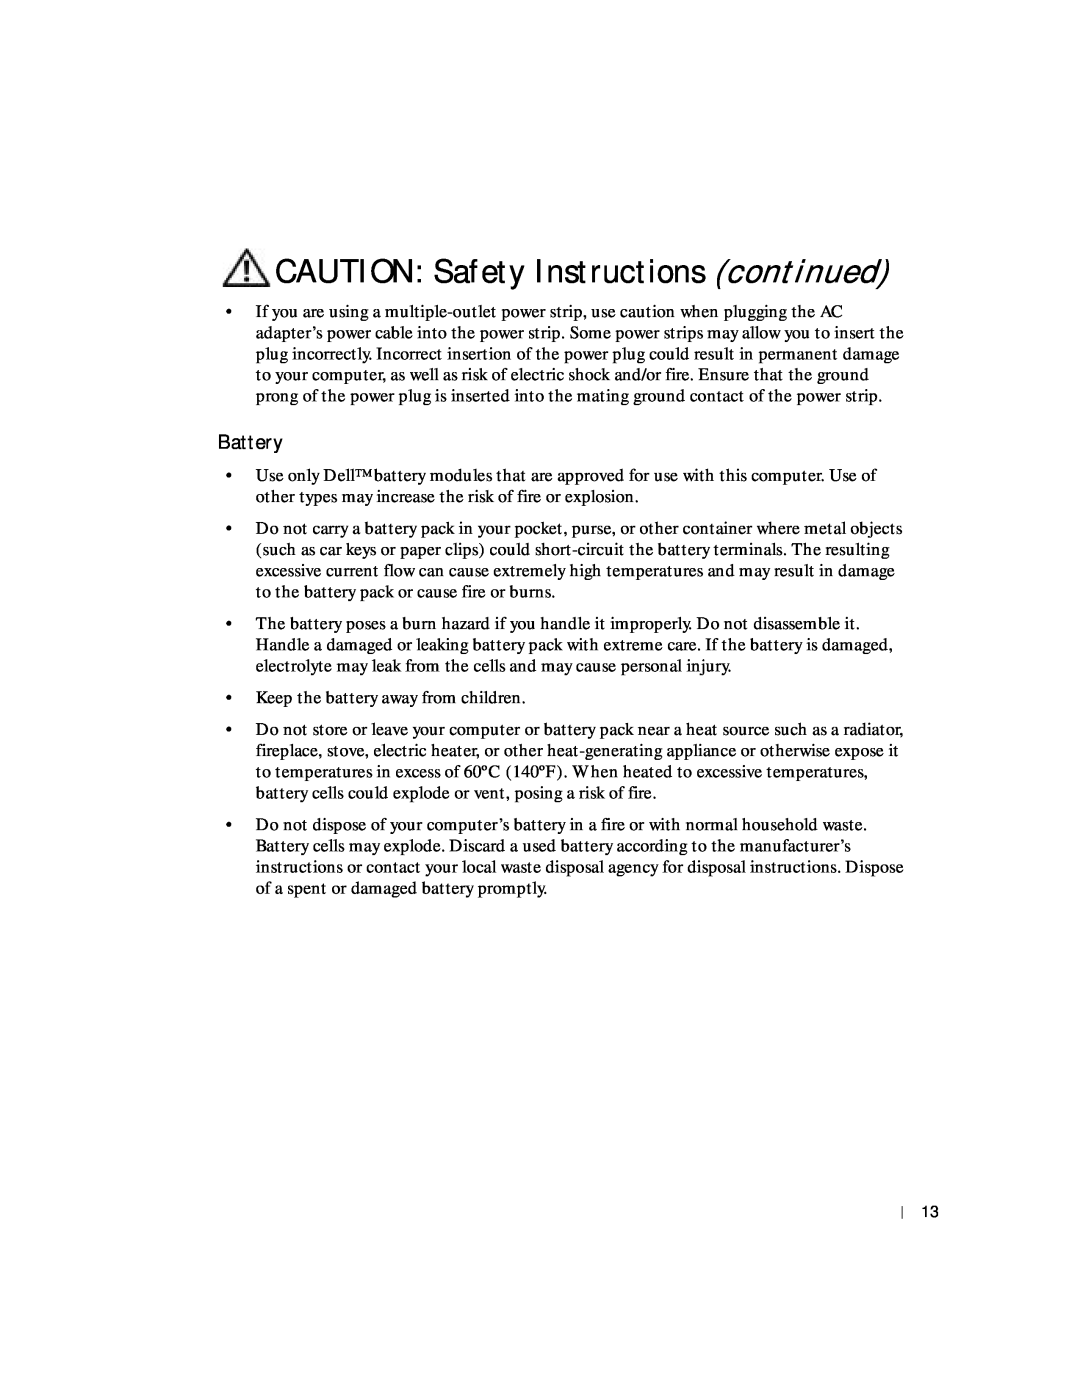 Dell 8600 manual Battery, CAUTION Safety Instructions continued 